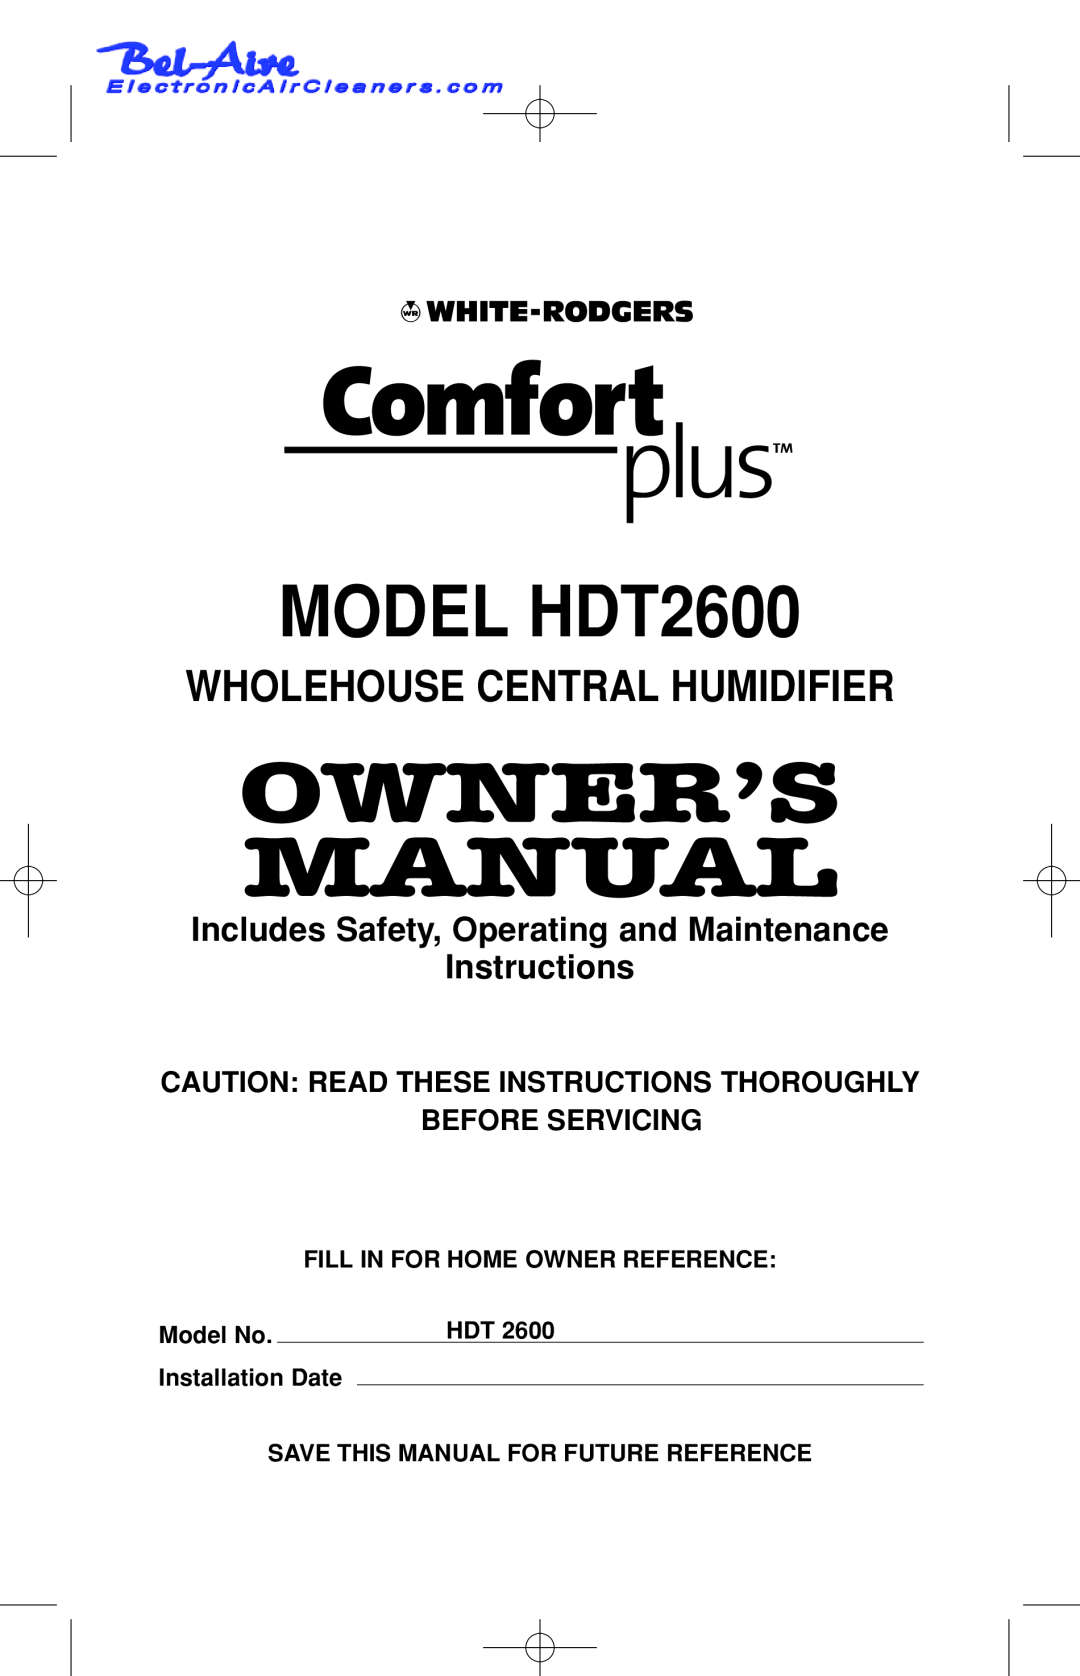 White Rodgers owner manual Fill In For Home Owner Reference, Model No, Installation Date, MODEL HDT2600, Instructions 